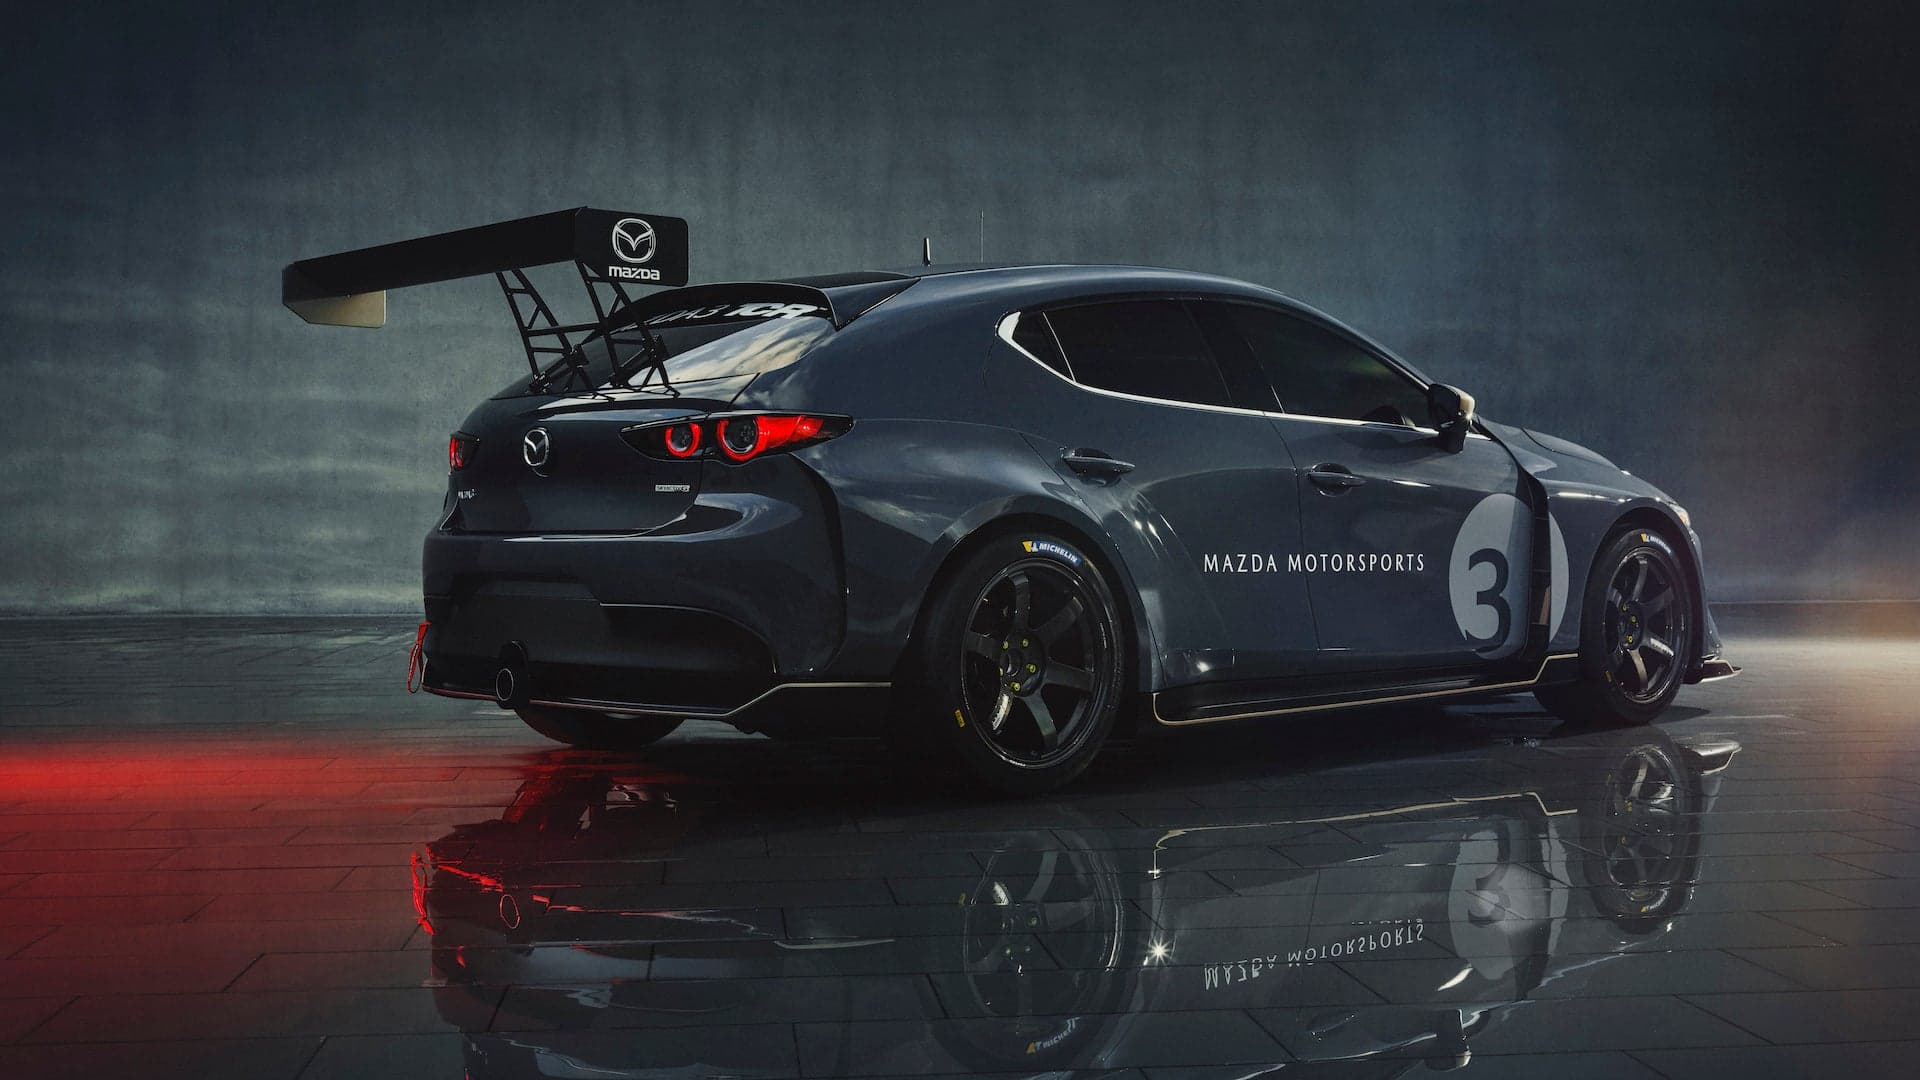 The 350-HP Mazda3 TCR Race Car Is the Ultimate Hatchback Money Can Buy